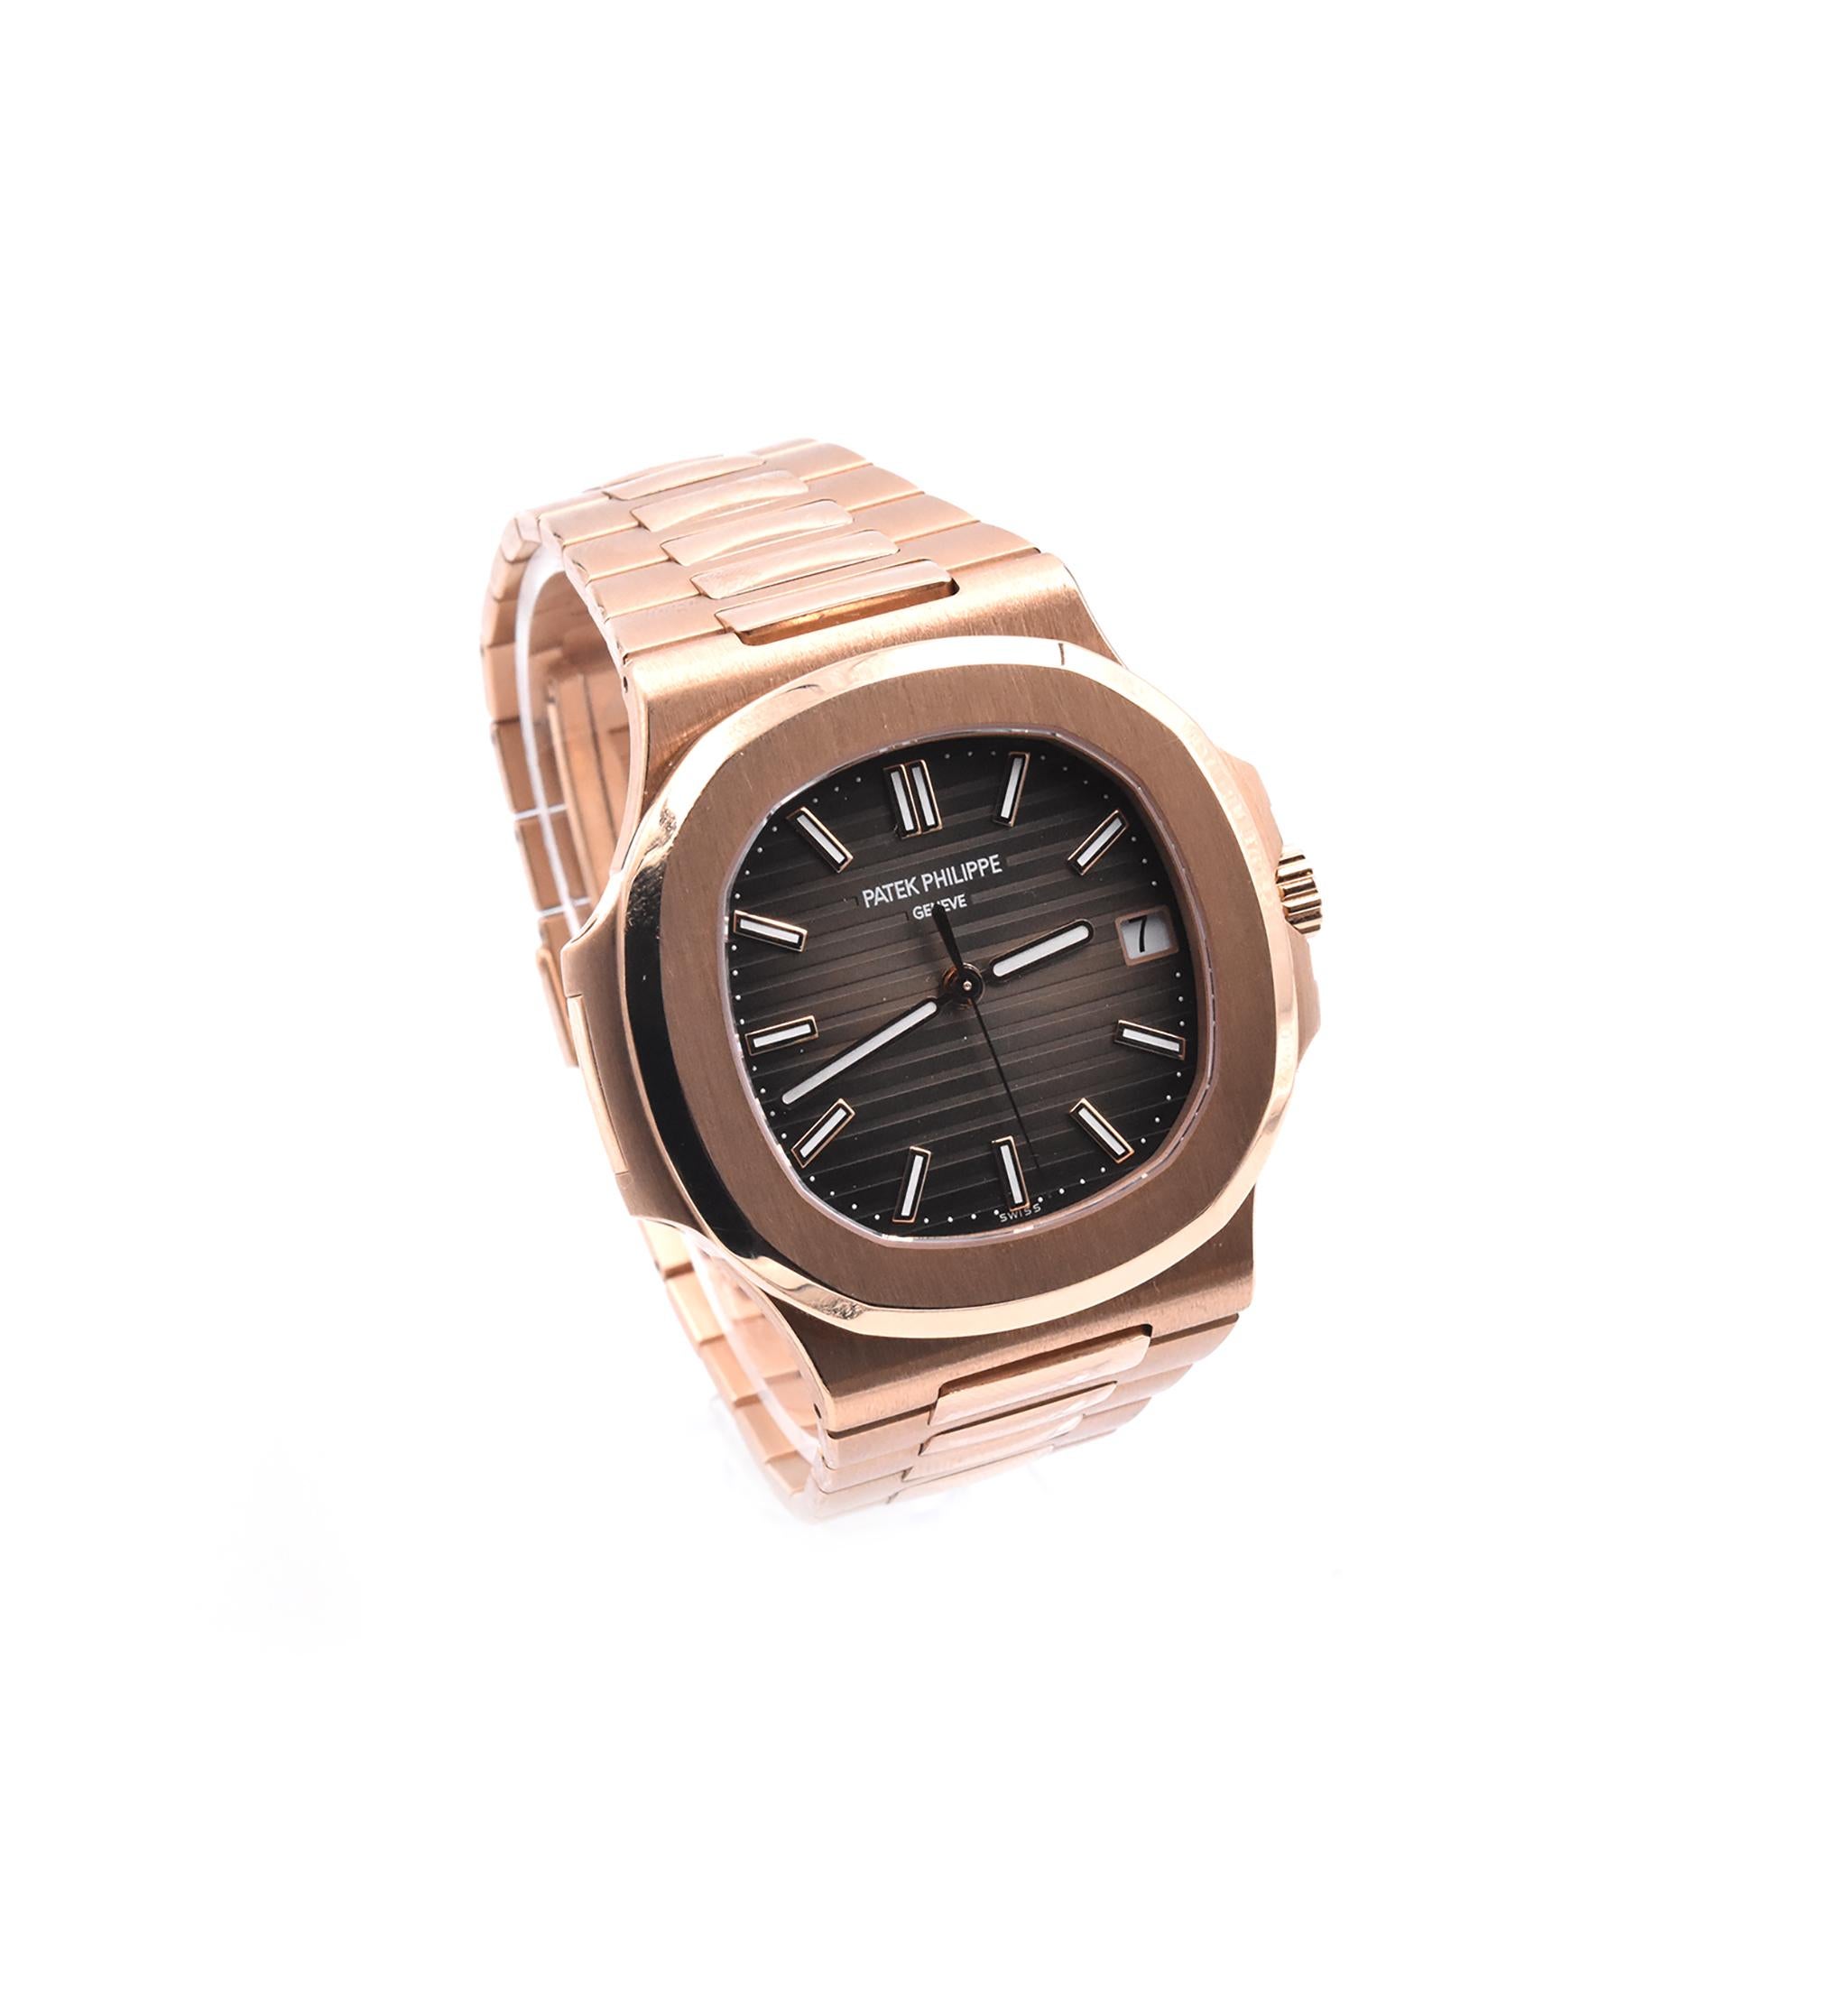 Movement: automatic, Caliber 26-330 S C.
Function: hours, minuets, seconds
Case: 40mm rose gold rounded octagonal shape case, sapphire crystal
Dial: light/dark brown gradated dial, gold applied hour markers with luminescent coating
Band: Patek